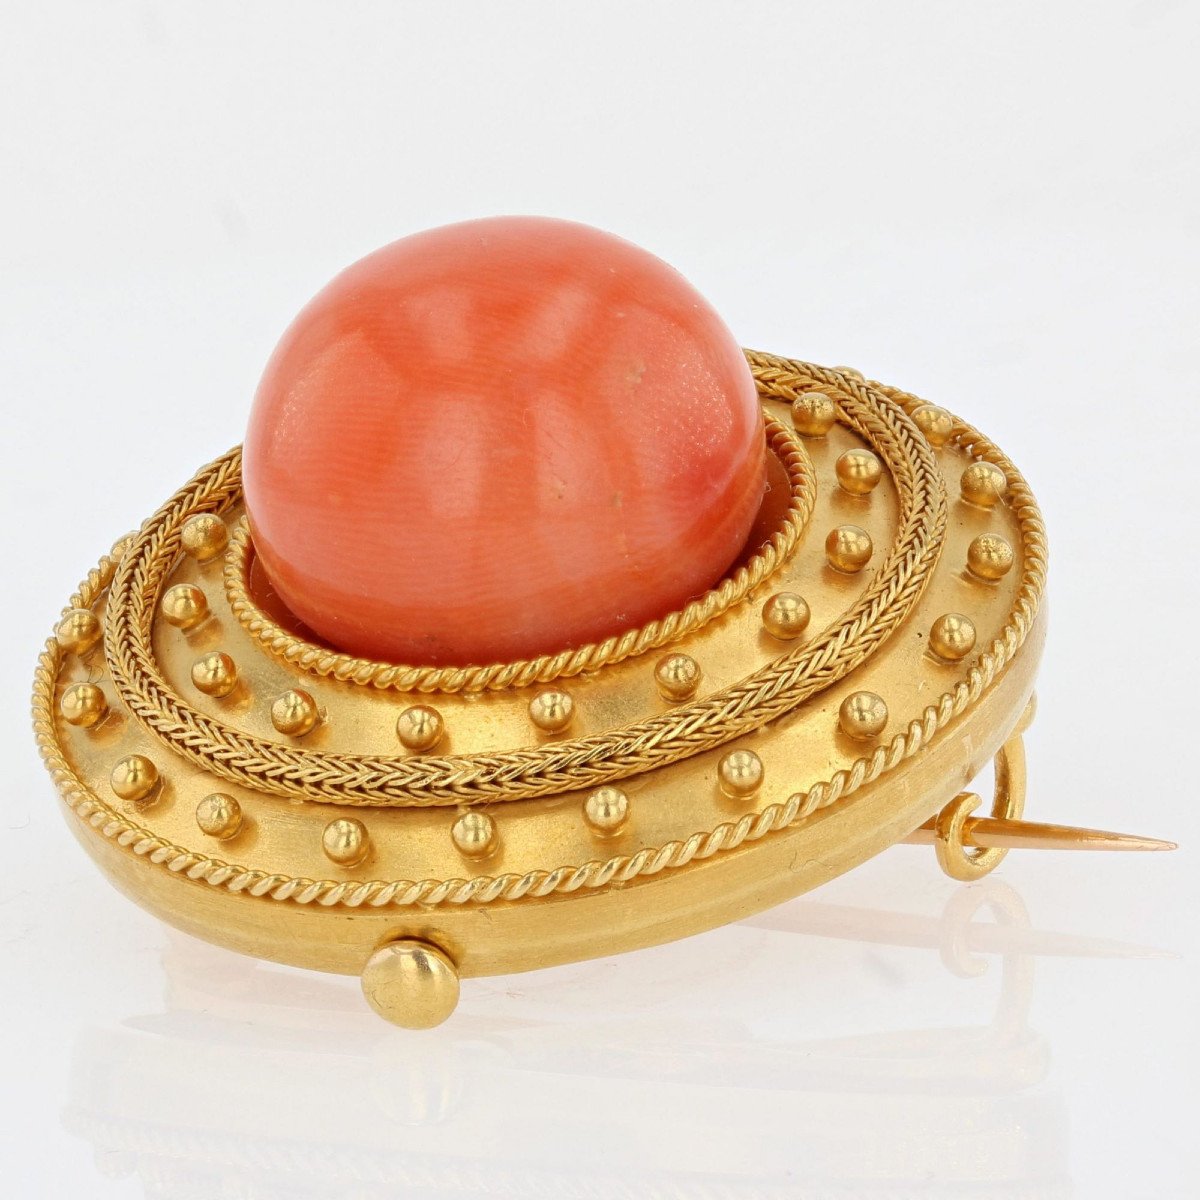 Antique Brooch In Matt Yellow Gold And Its Coral Pearl-photo-1